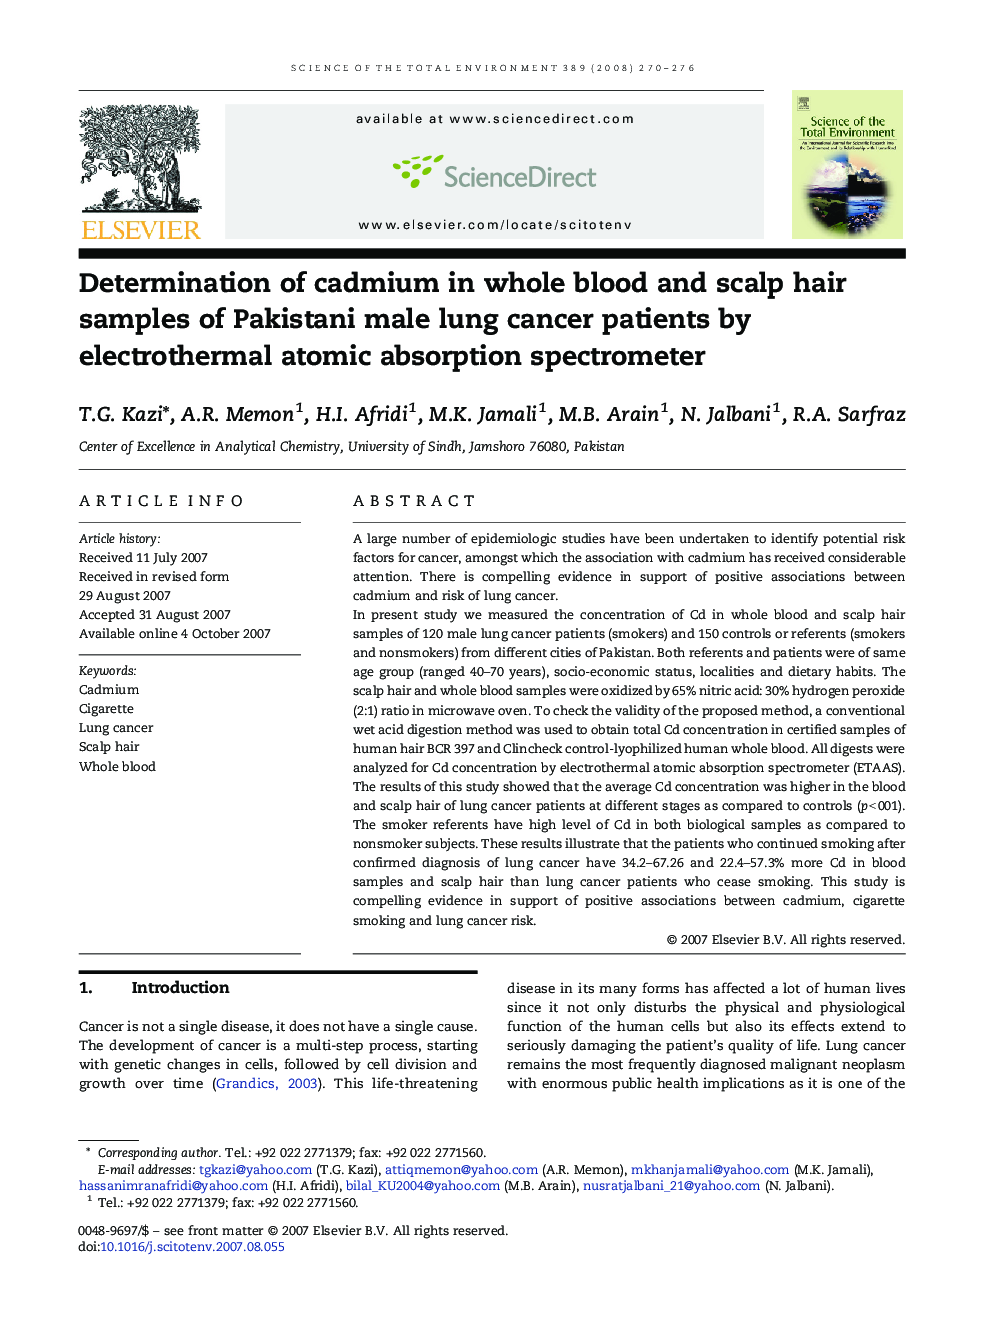 Determination of cadmium in whole blood and scalp hair samples of Pakistani male lung cancer patients by electrothermal atomic absorption spectrometer